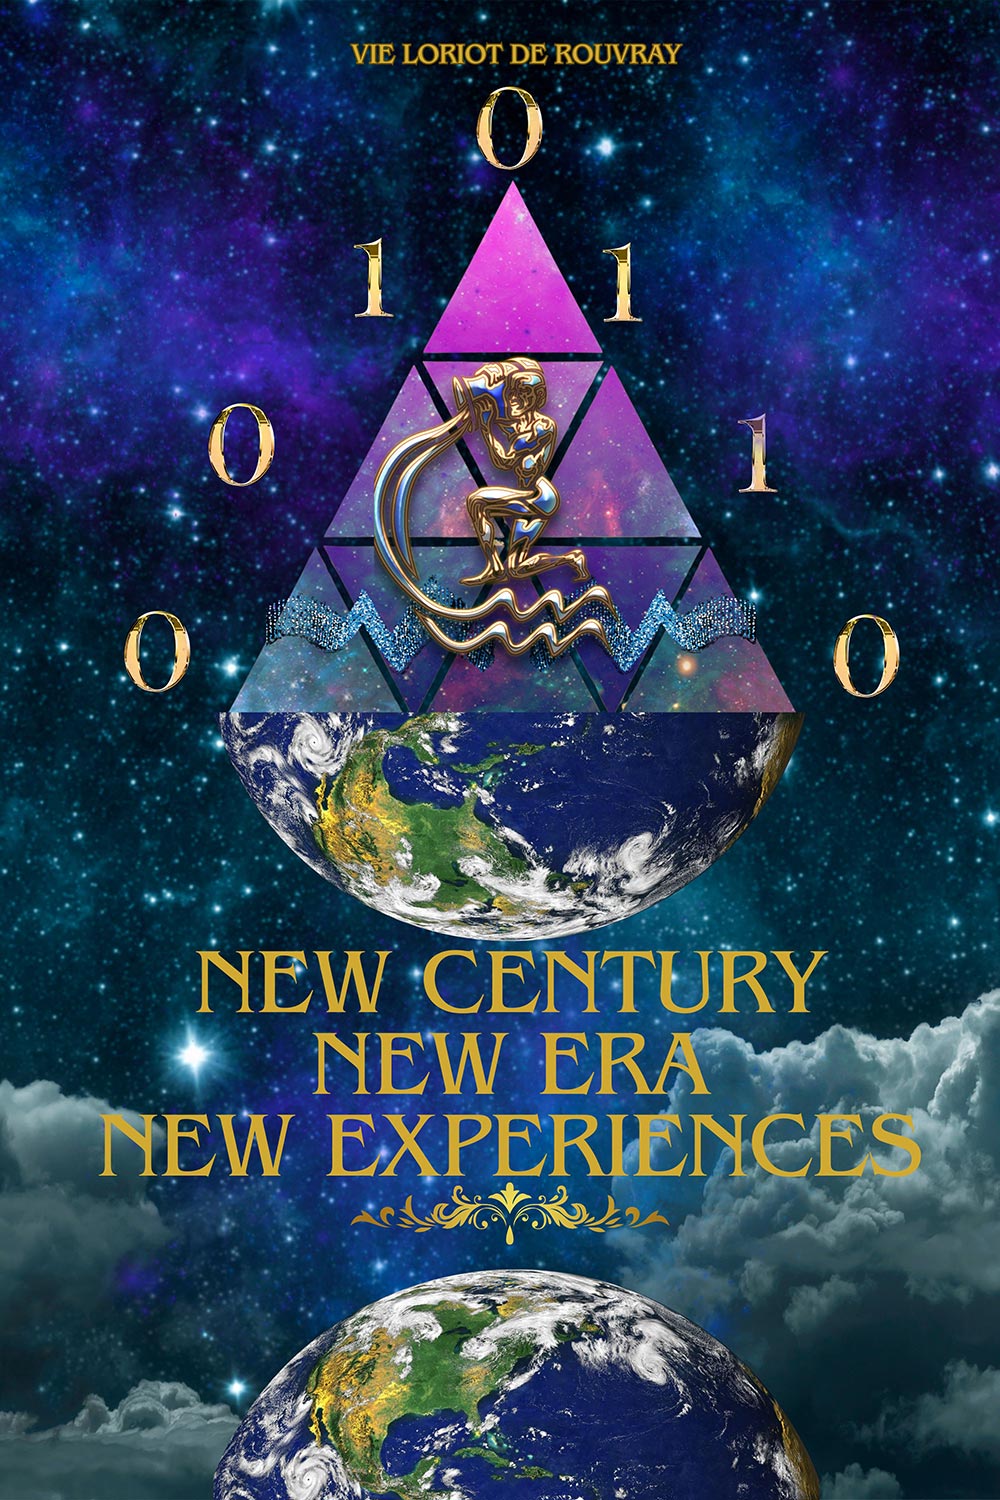 New Century, New Era, New Experiences: “The Aquarius Evolving State of the World of Consciousness”